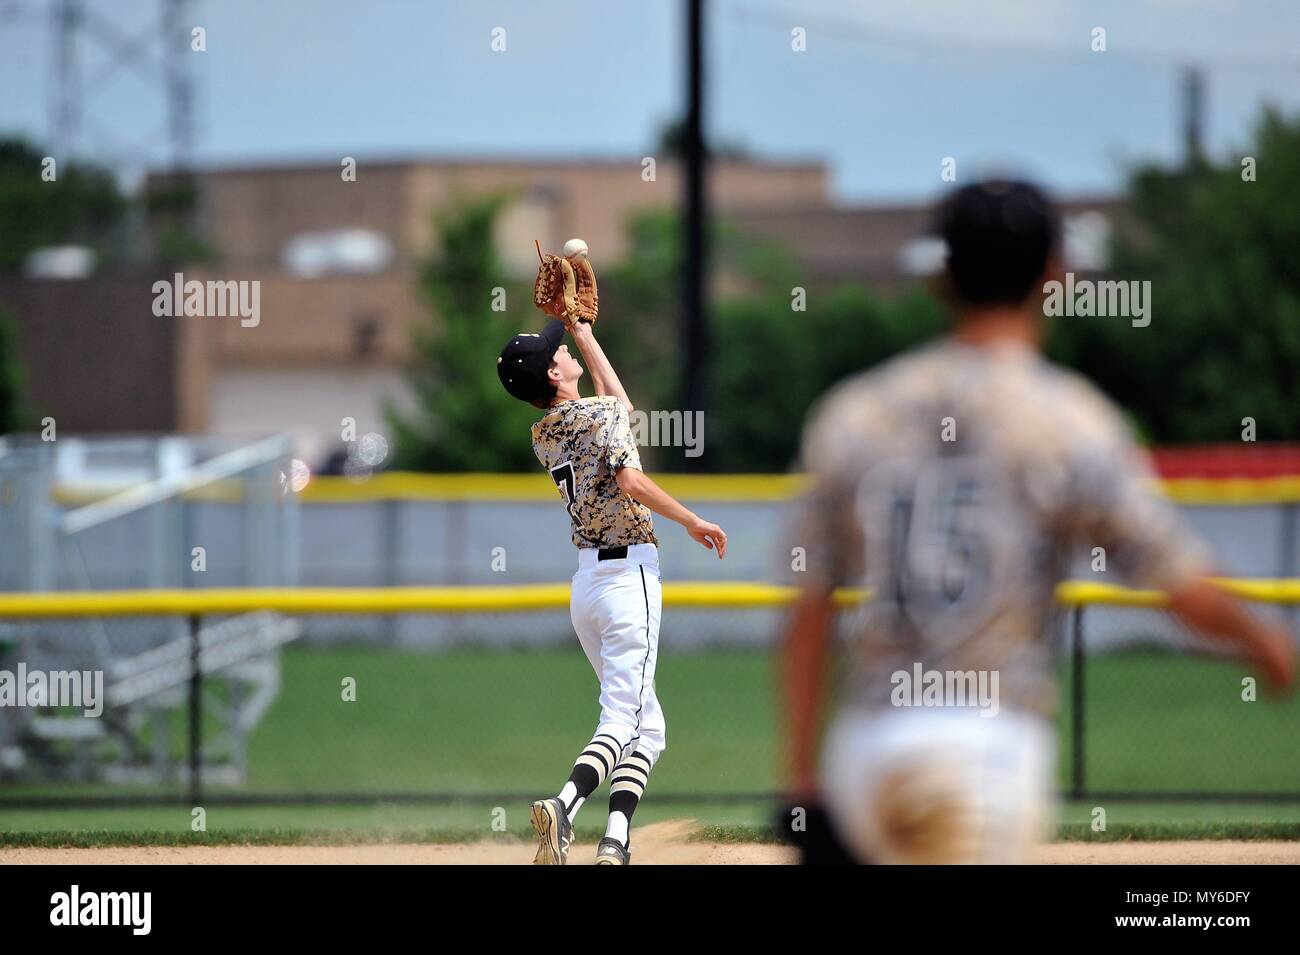 Second baseman making a running catch of a pop fly in short right-center field. USA. Stock Photo